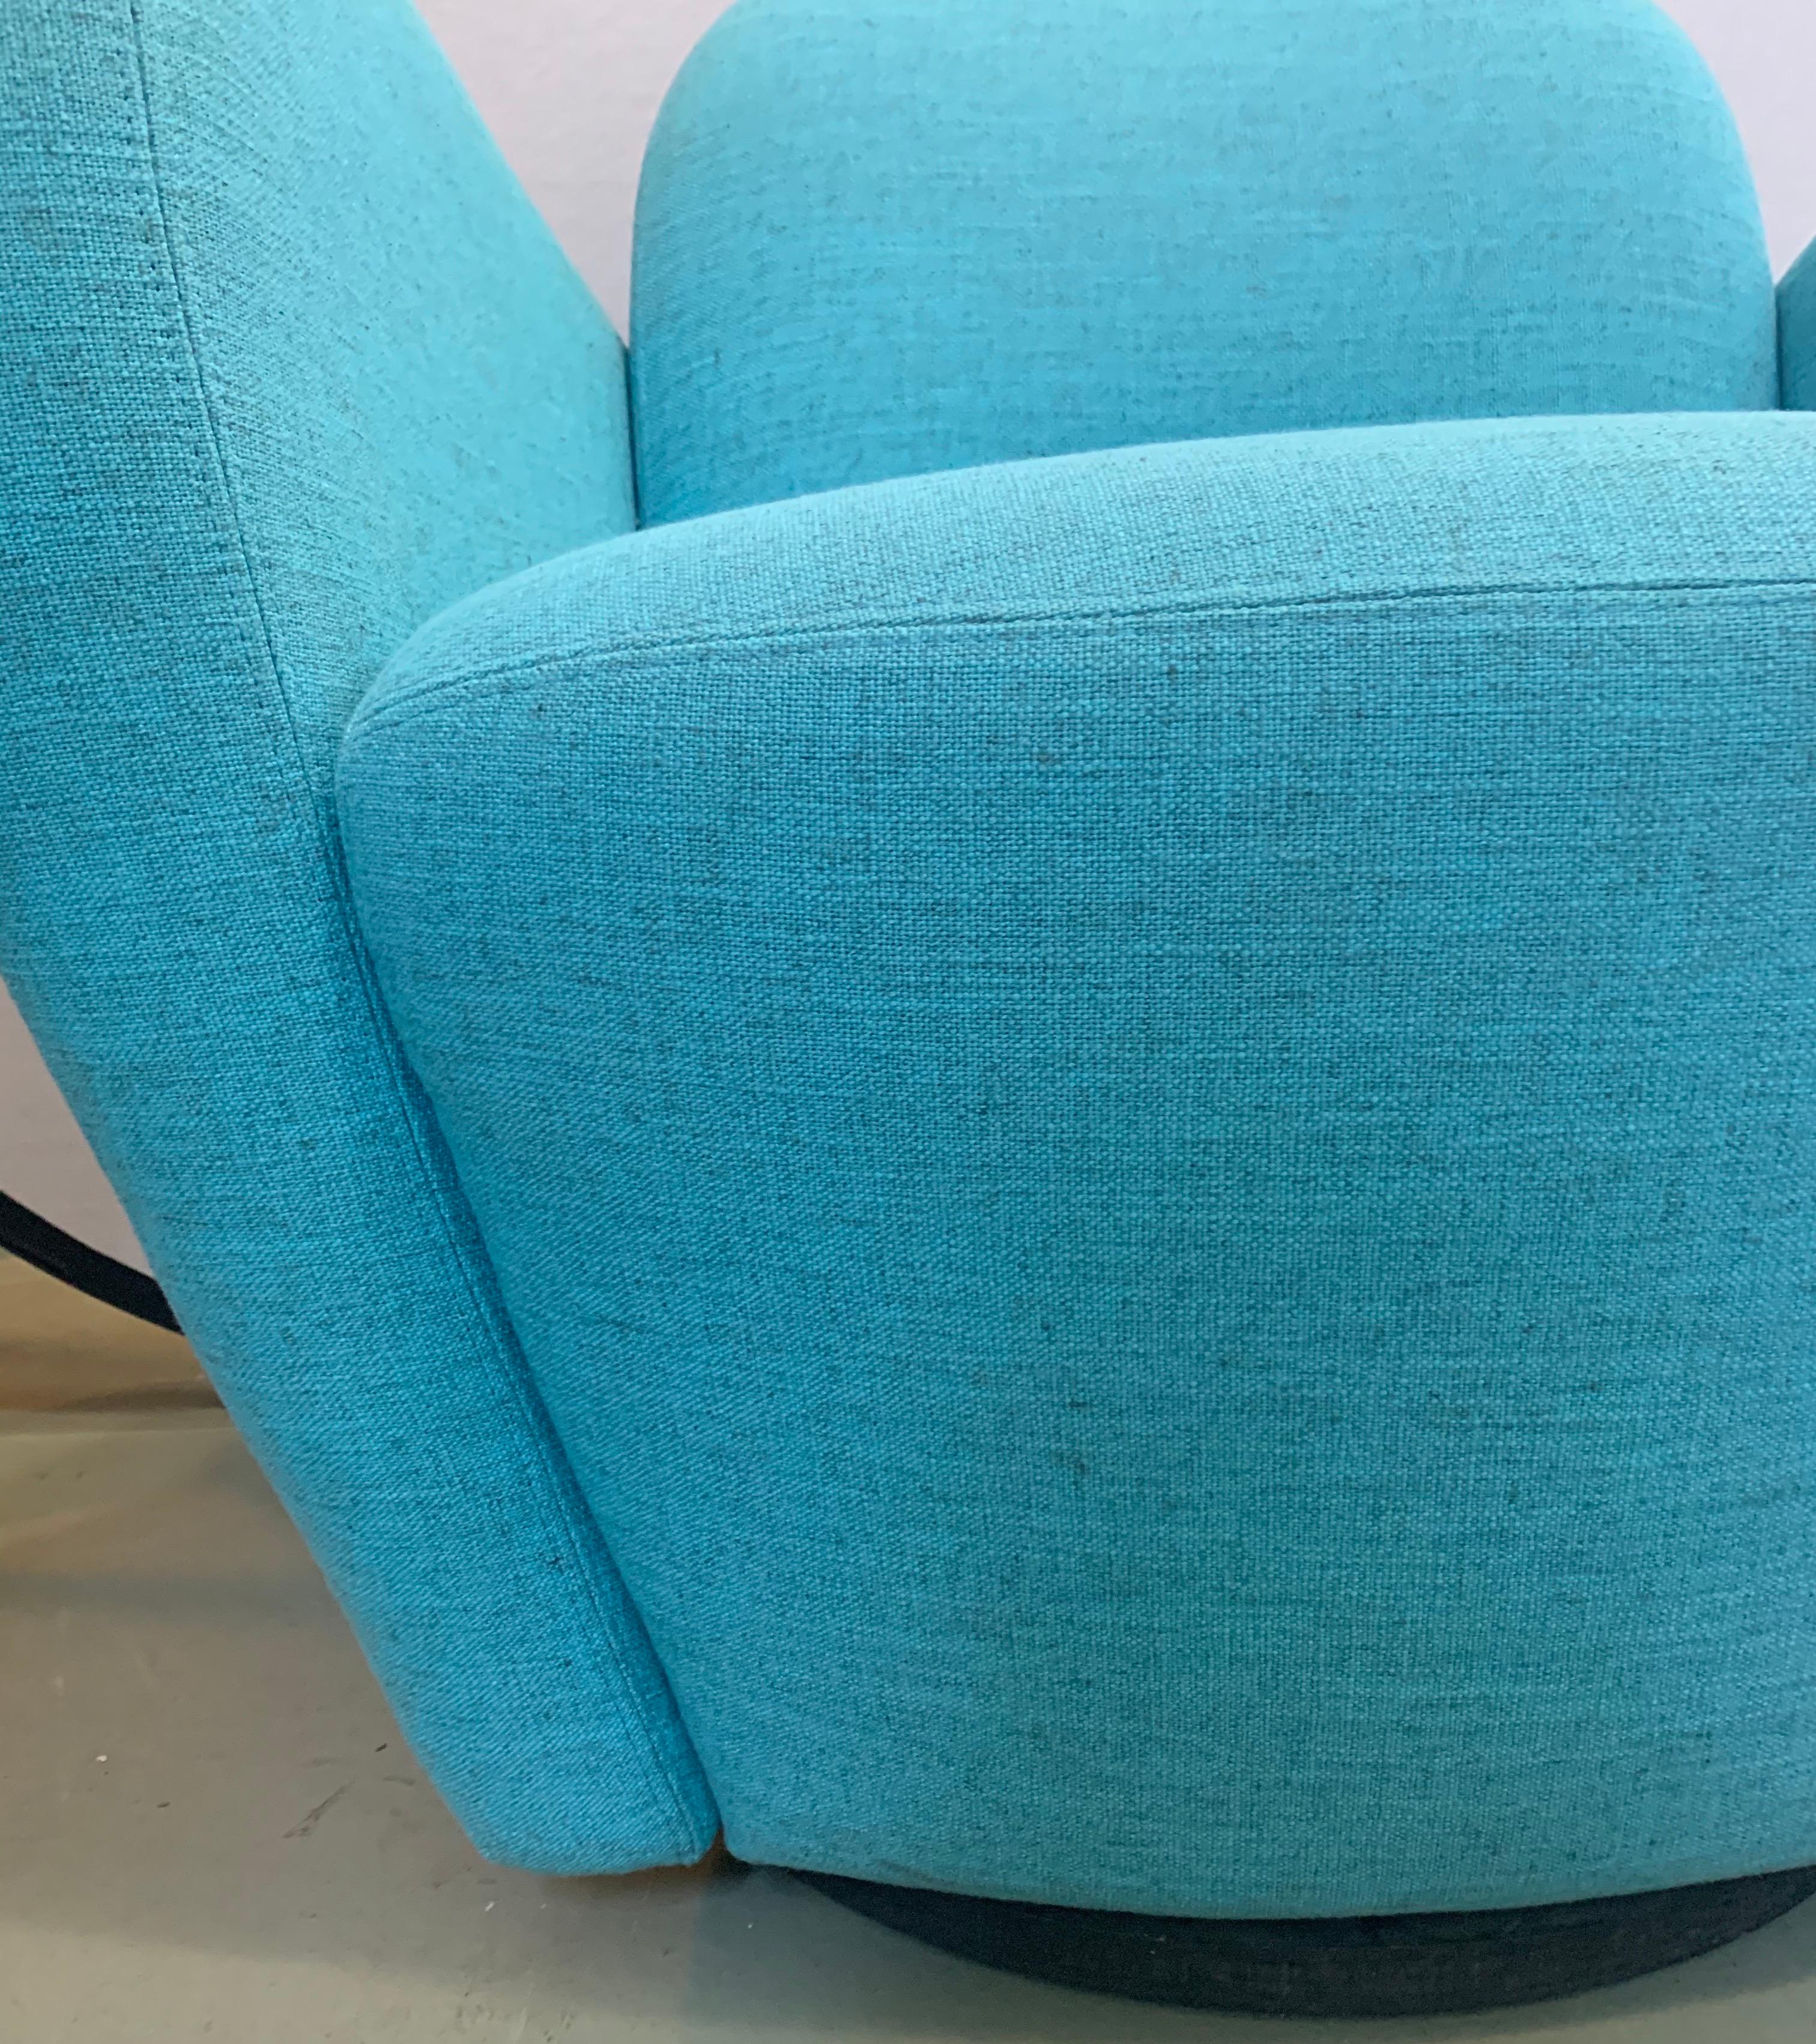 Iconic midcentury, great scale and better lines comes with this swivel lounge chair made by Weiman. The fabric was reupholstered recently and done in a vibrant turquoise blue. Now, more than ever, home is where the heart is.